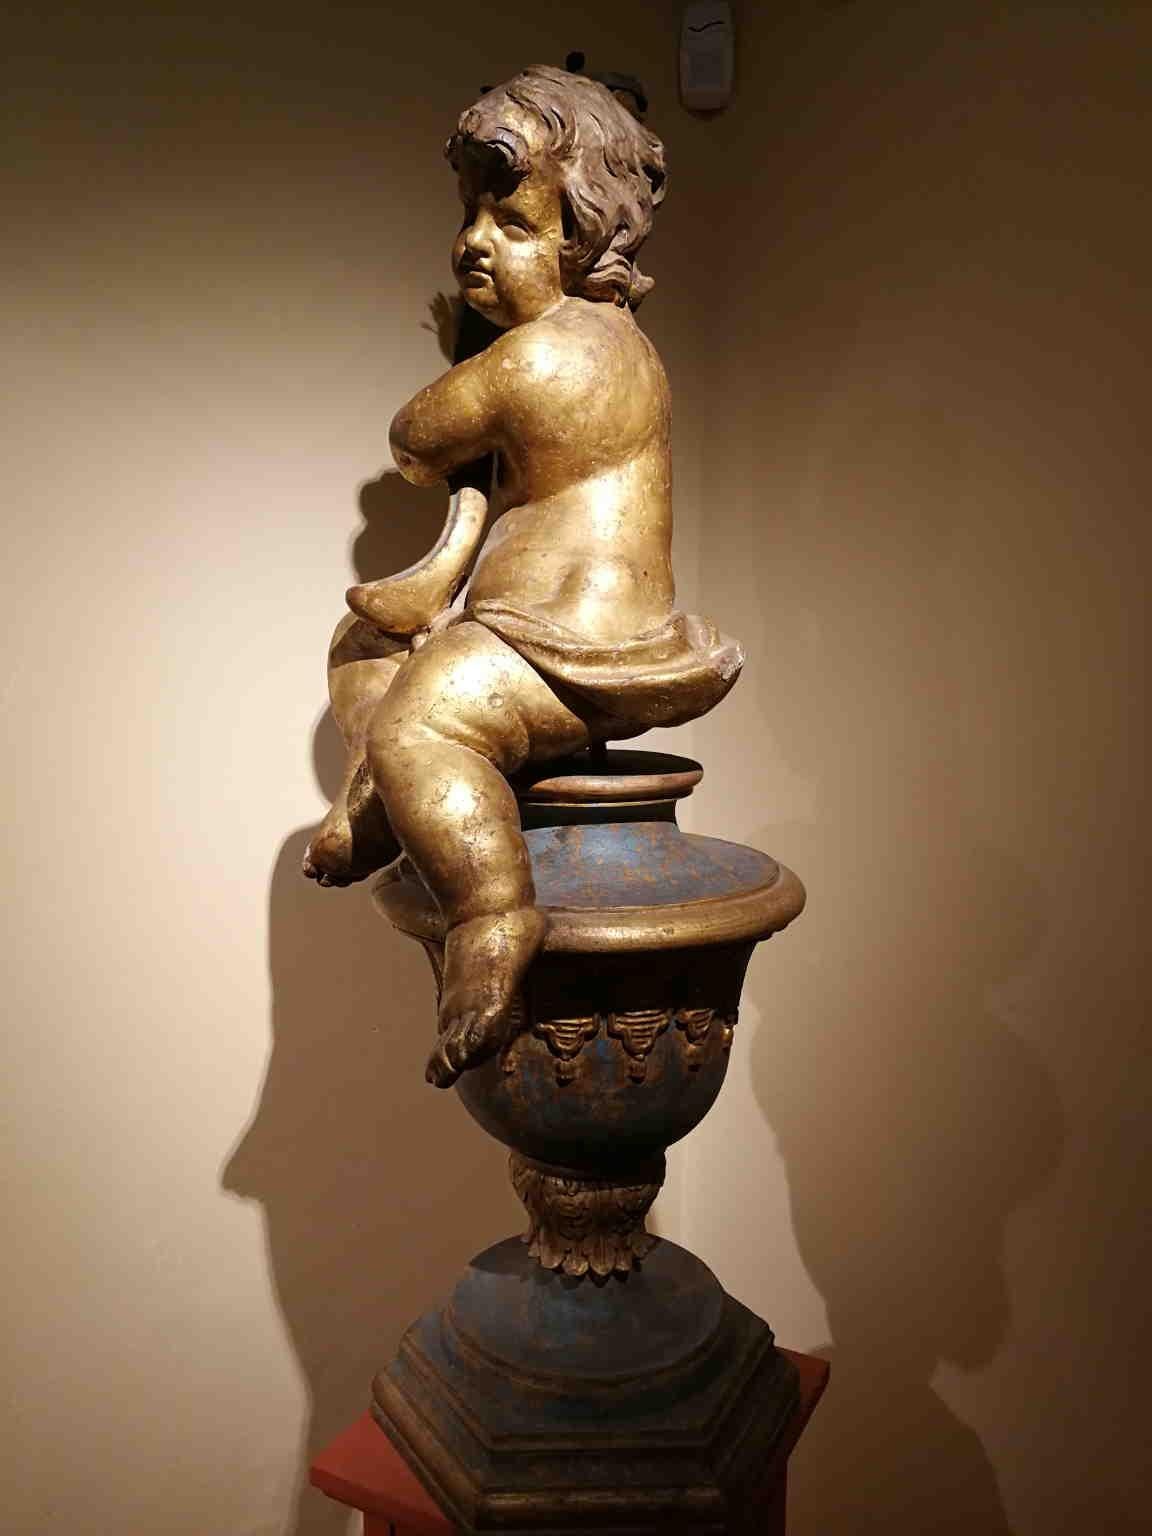 Tuscan Baroque Nude Putto Candle Holder 17-18 century gilded wood - Brown Figurative Sculpture by Unknown